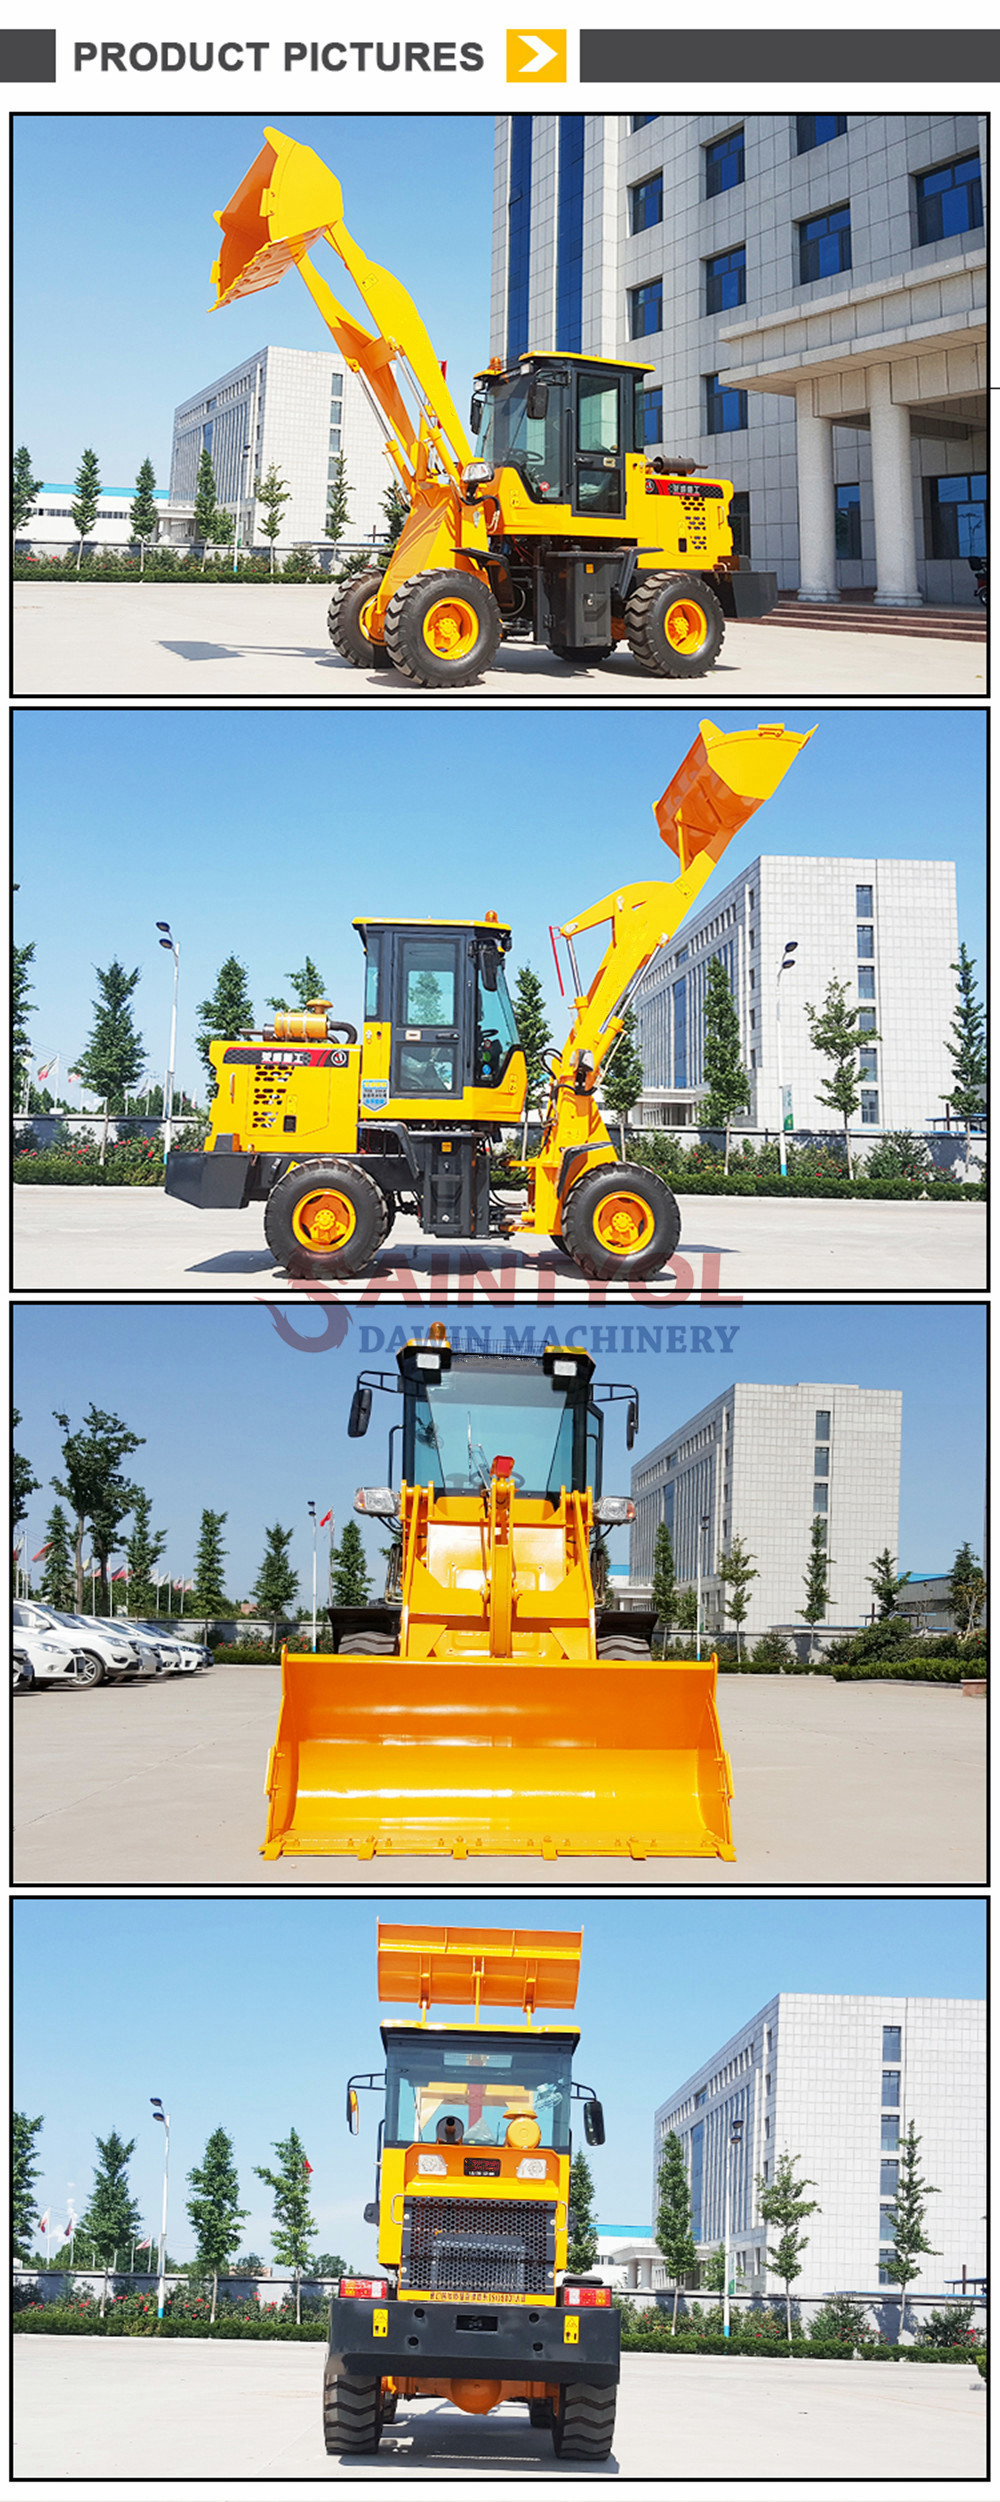 china wheel loader pictures